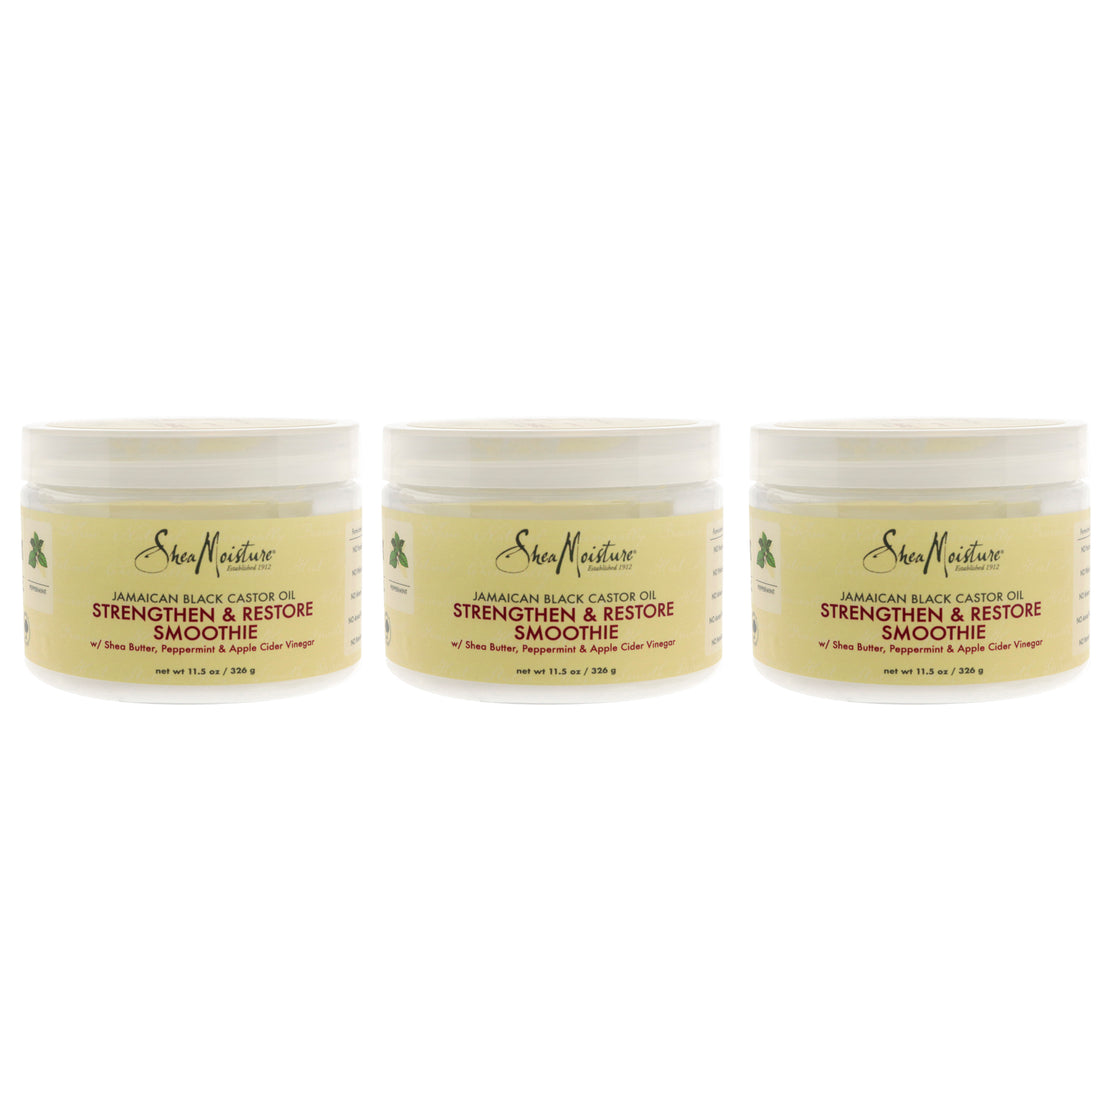 Jamaican Black Castor Oil Strengthen and Restore Smoothie Cream by Shea Moisture for Unisex - 12 oz Cream - Pack of 3